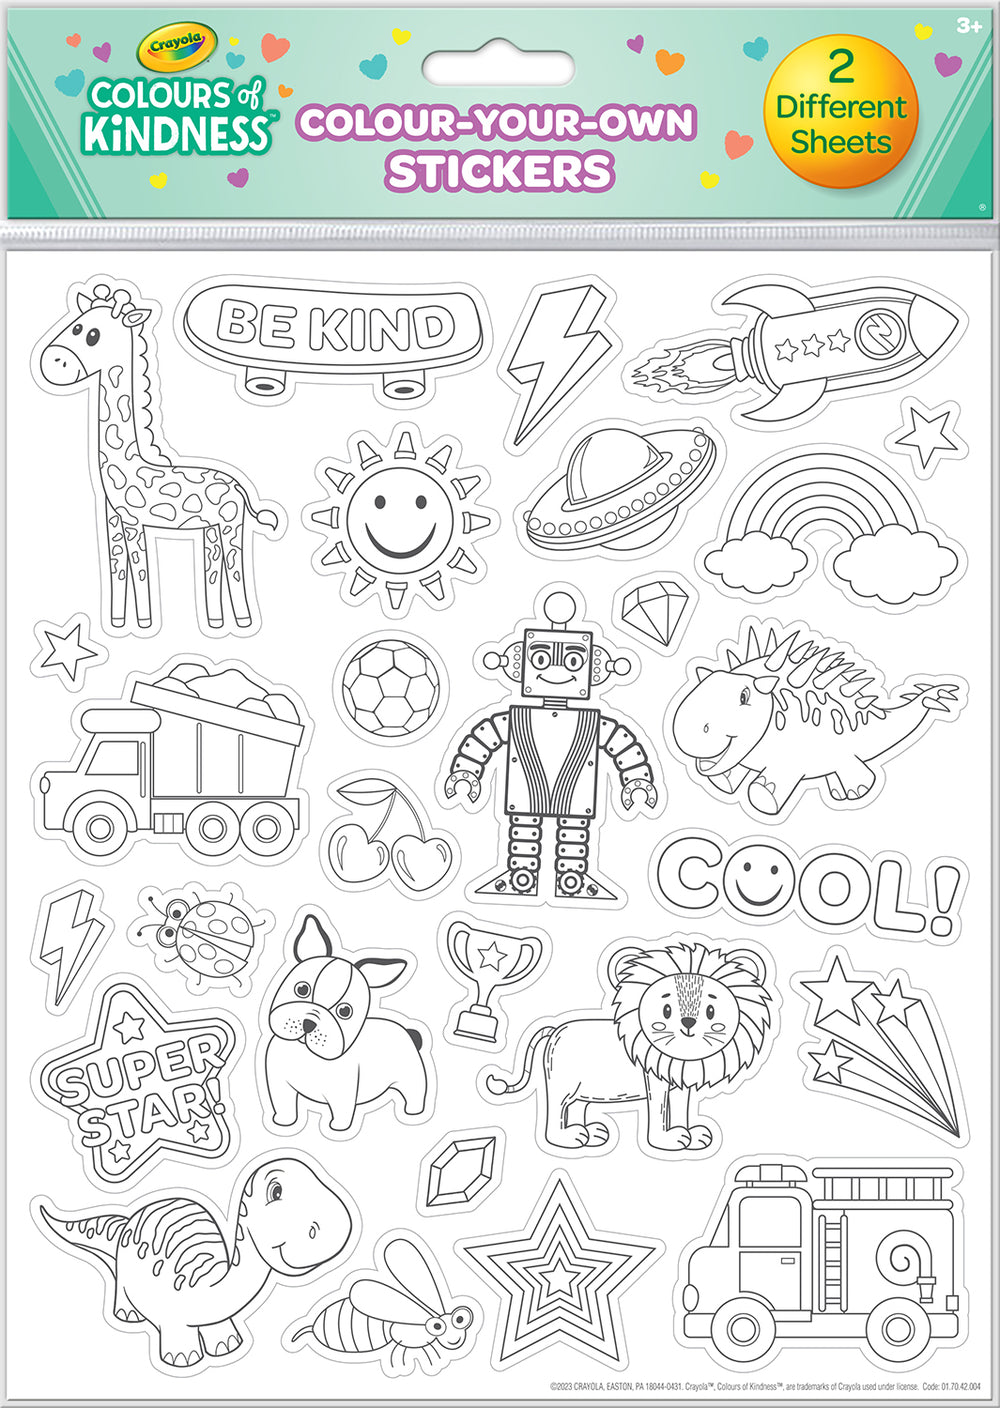 Crayola Colour-Your-Own Stickers (Cool Time) - Anilas UK